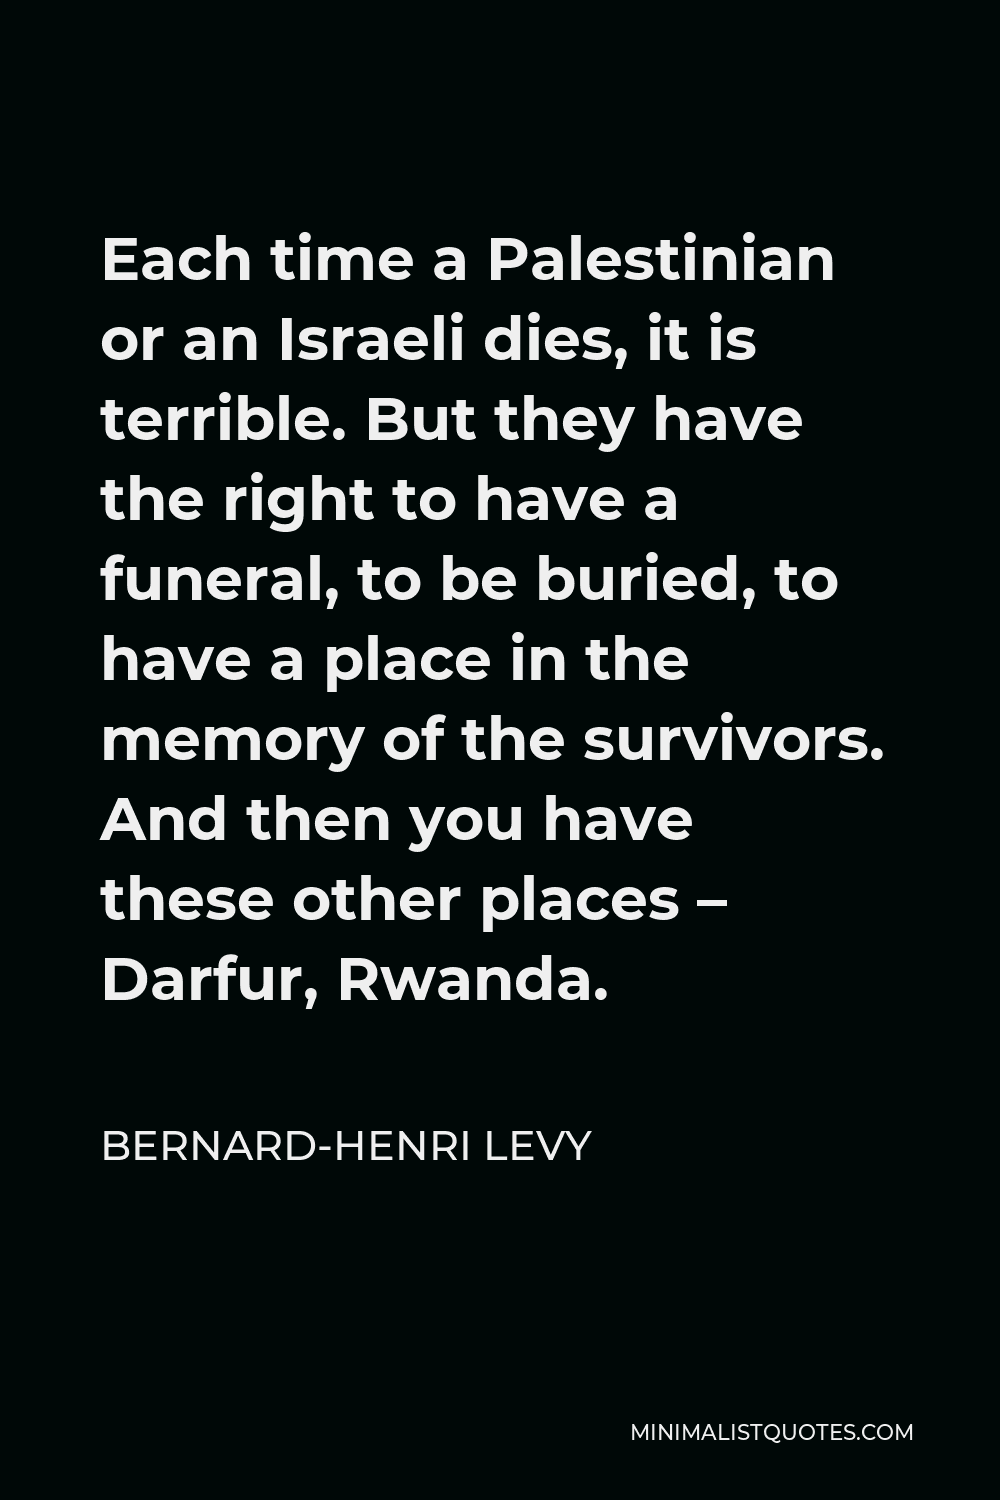 Bernard-Henri Levy Quote - Each time a Palestinian or an Israeli dies, it is terrible. But they have the right to have a funeral, to be buried, to have a place in the memory of the survivors. And then you have these other places – Darfur, Rwanda.